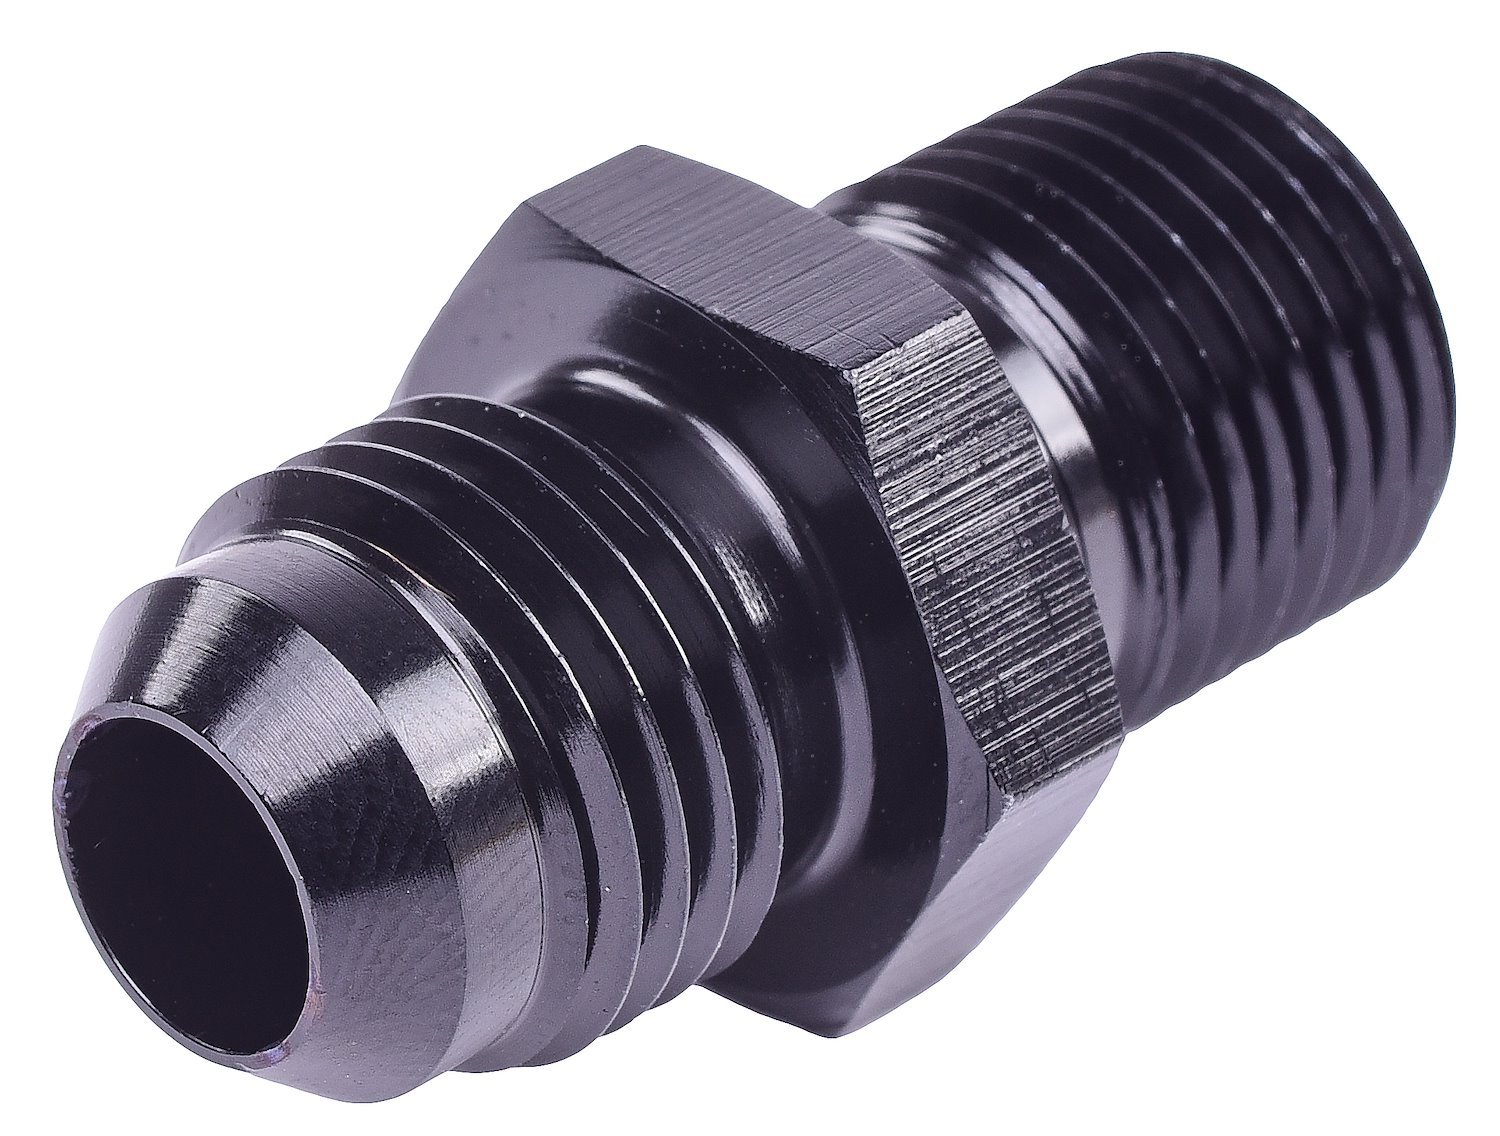 AN to Metric Adapter Fitting [-6 AN Male to 14mm x 1.25 Male, Black]